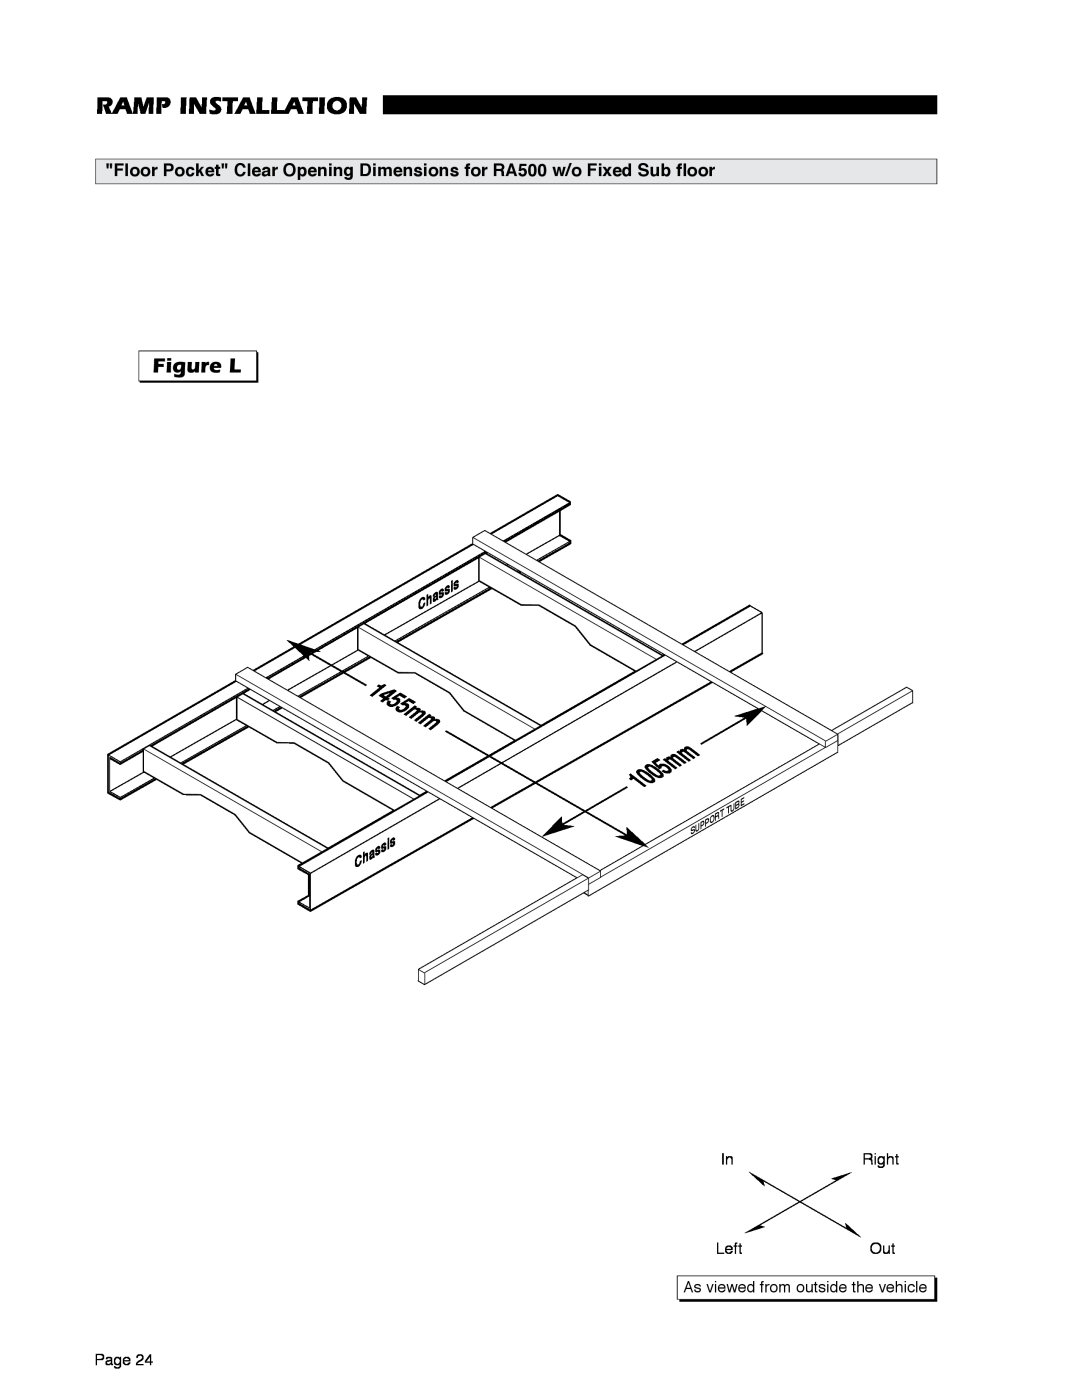 Braun RA500 service manual Figure L, 1455mm, Ramp Installation, InRight LeftOut As viewed from outside the vehicle Page 